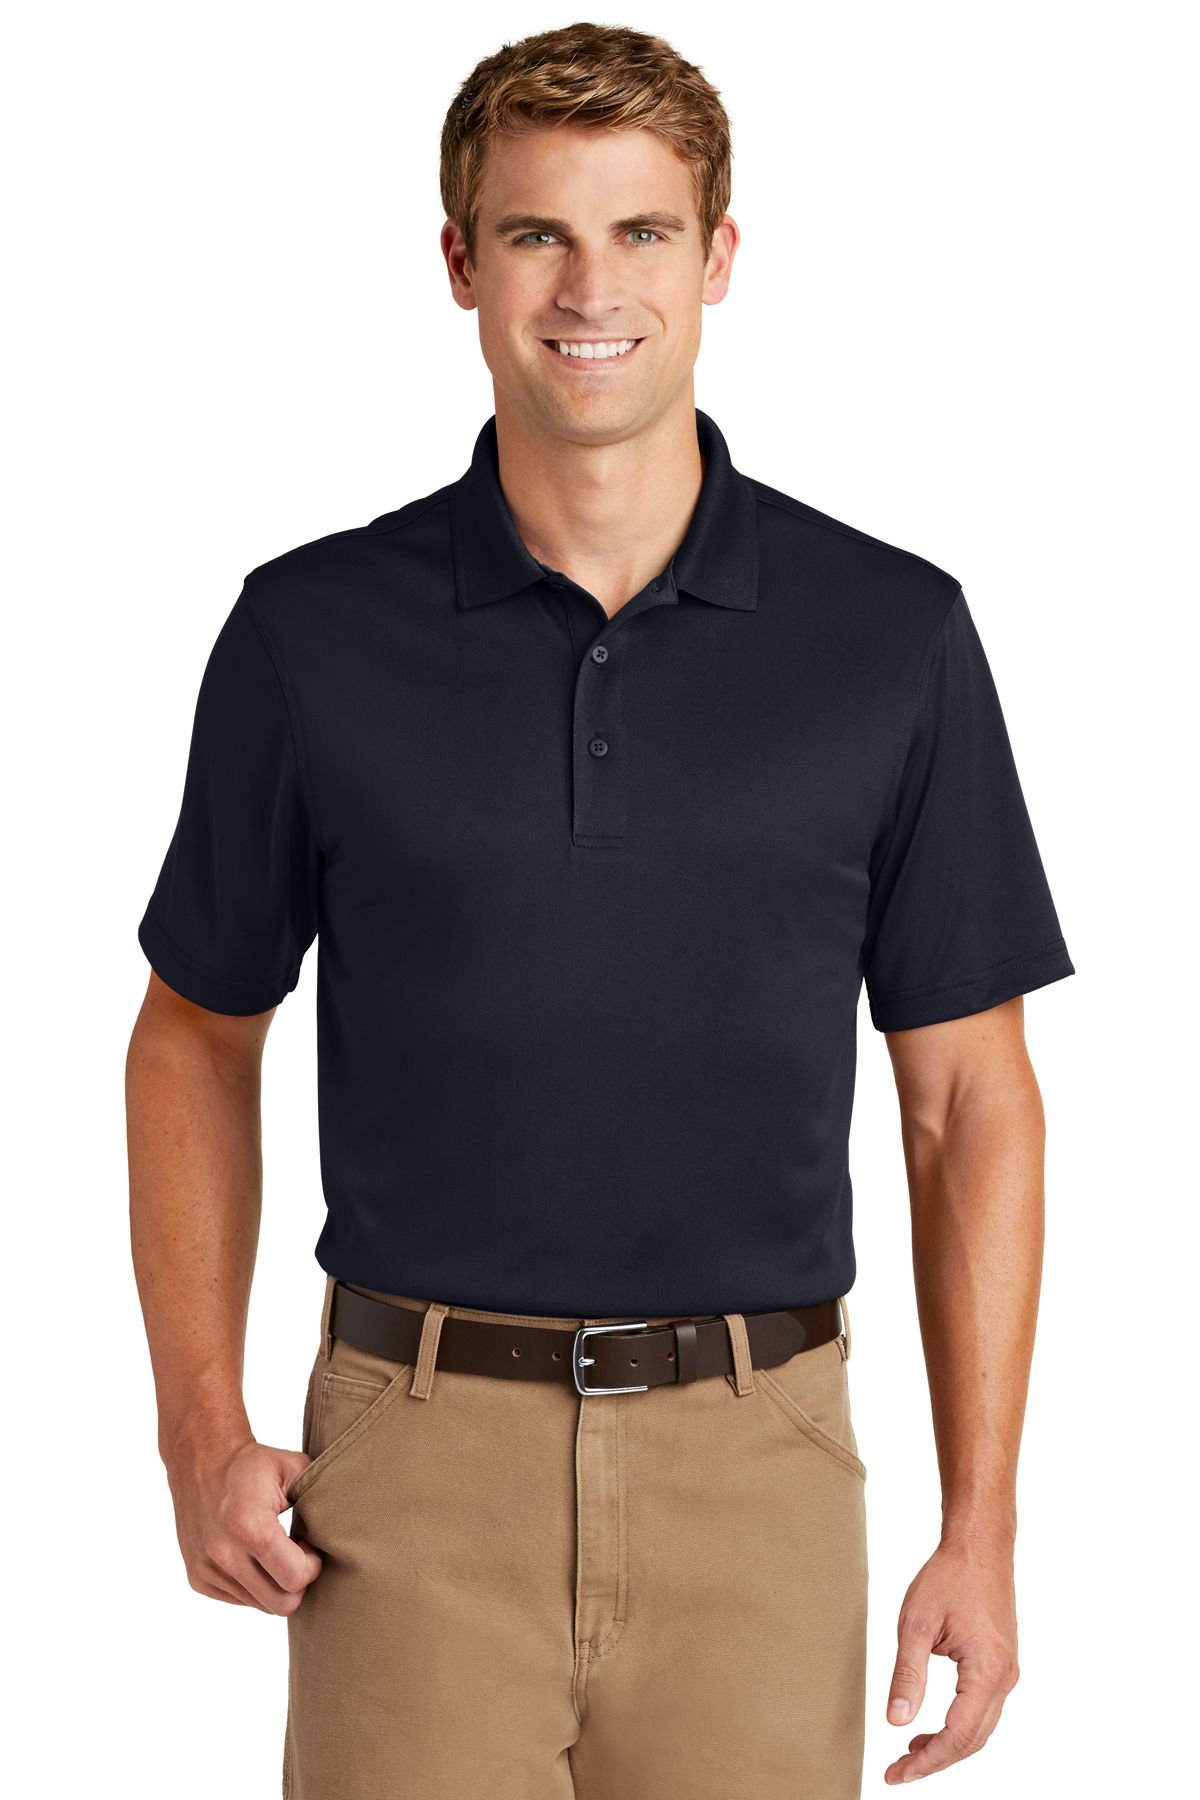 CornerStone - Select Snag-Proof Polo | Product | Company Casuals